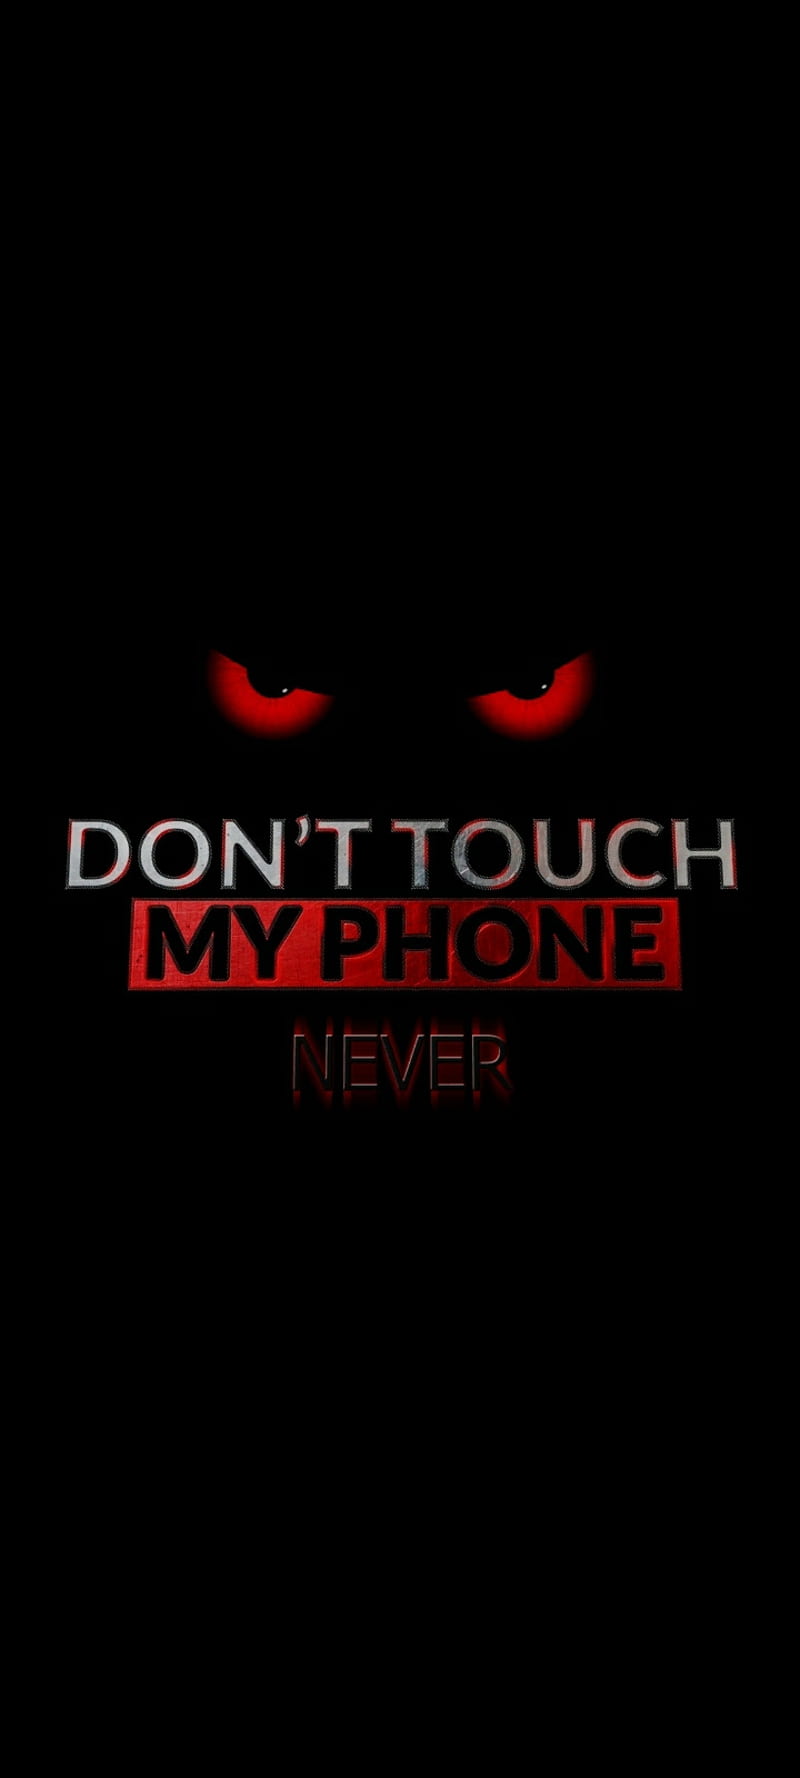 Dont touch my phone, aggressive, red, red eyes, scary, vicious, HD phone  wallpaper | Peakpx